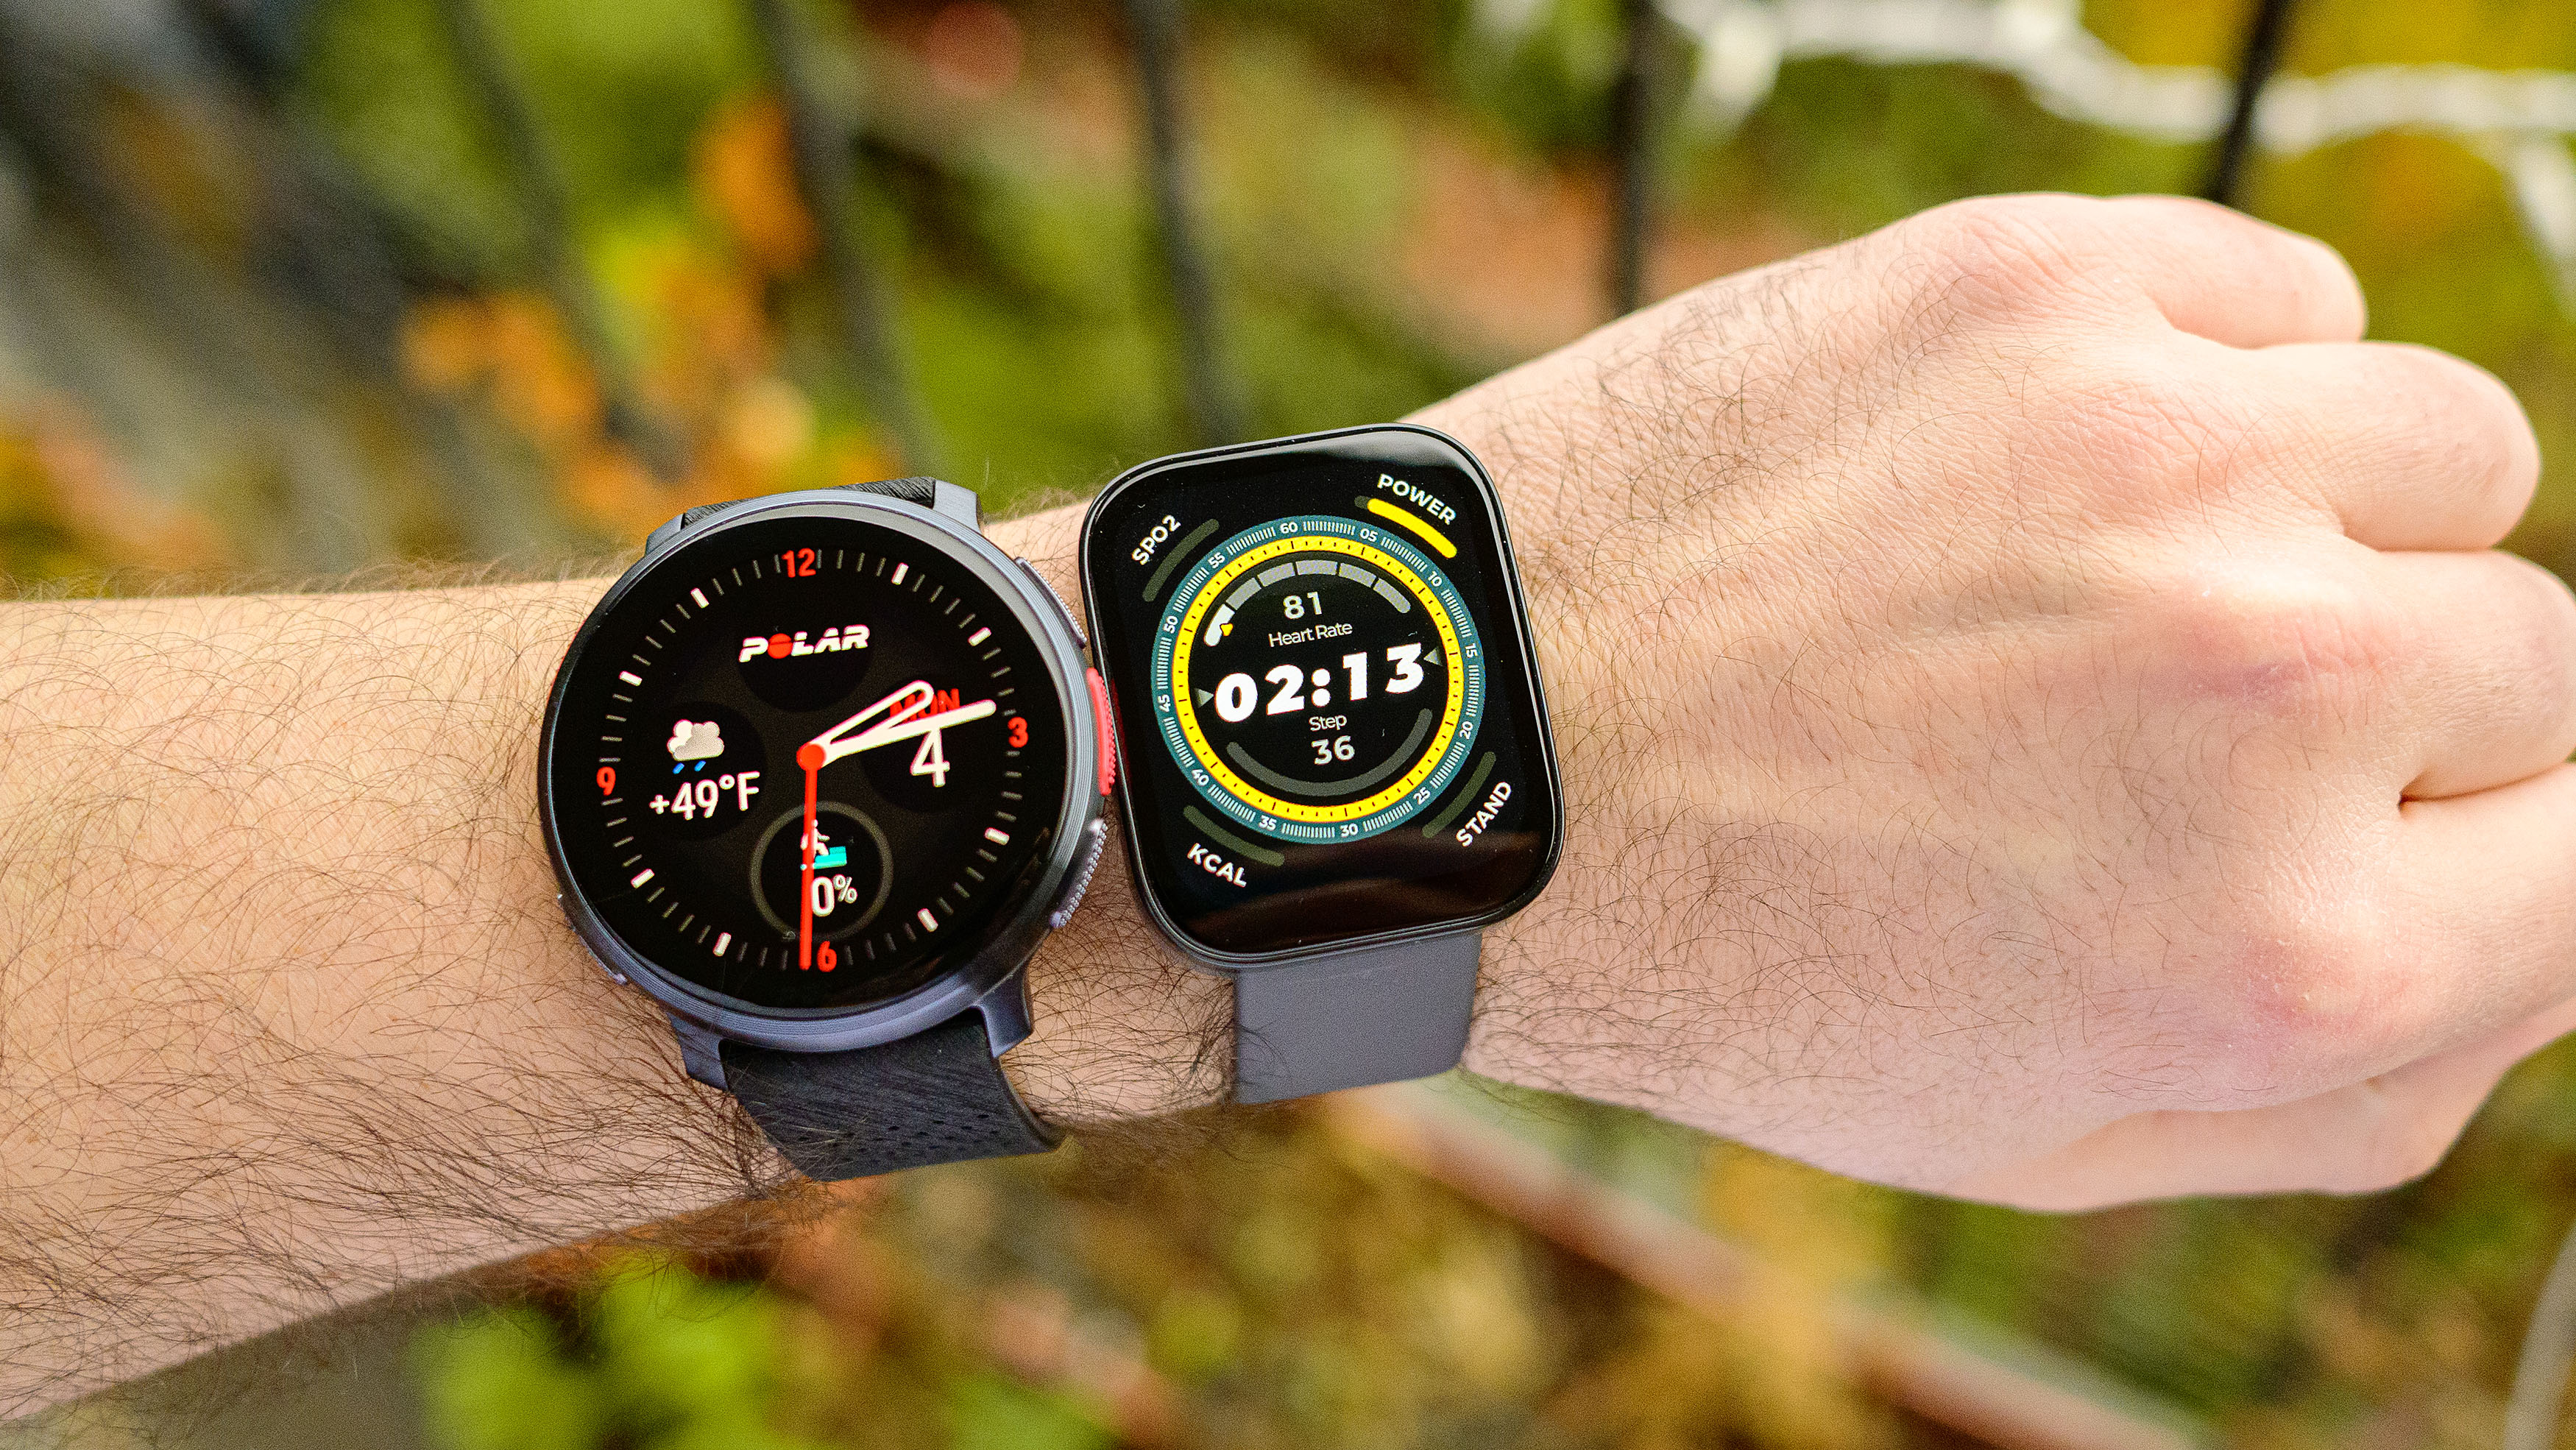 Amazfit Bip U Pro Review: A Reliable, Fun Budget Smartwatch for